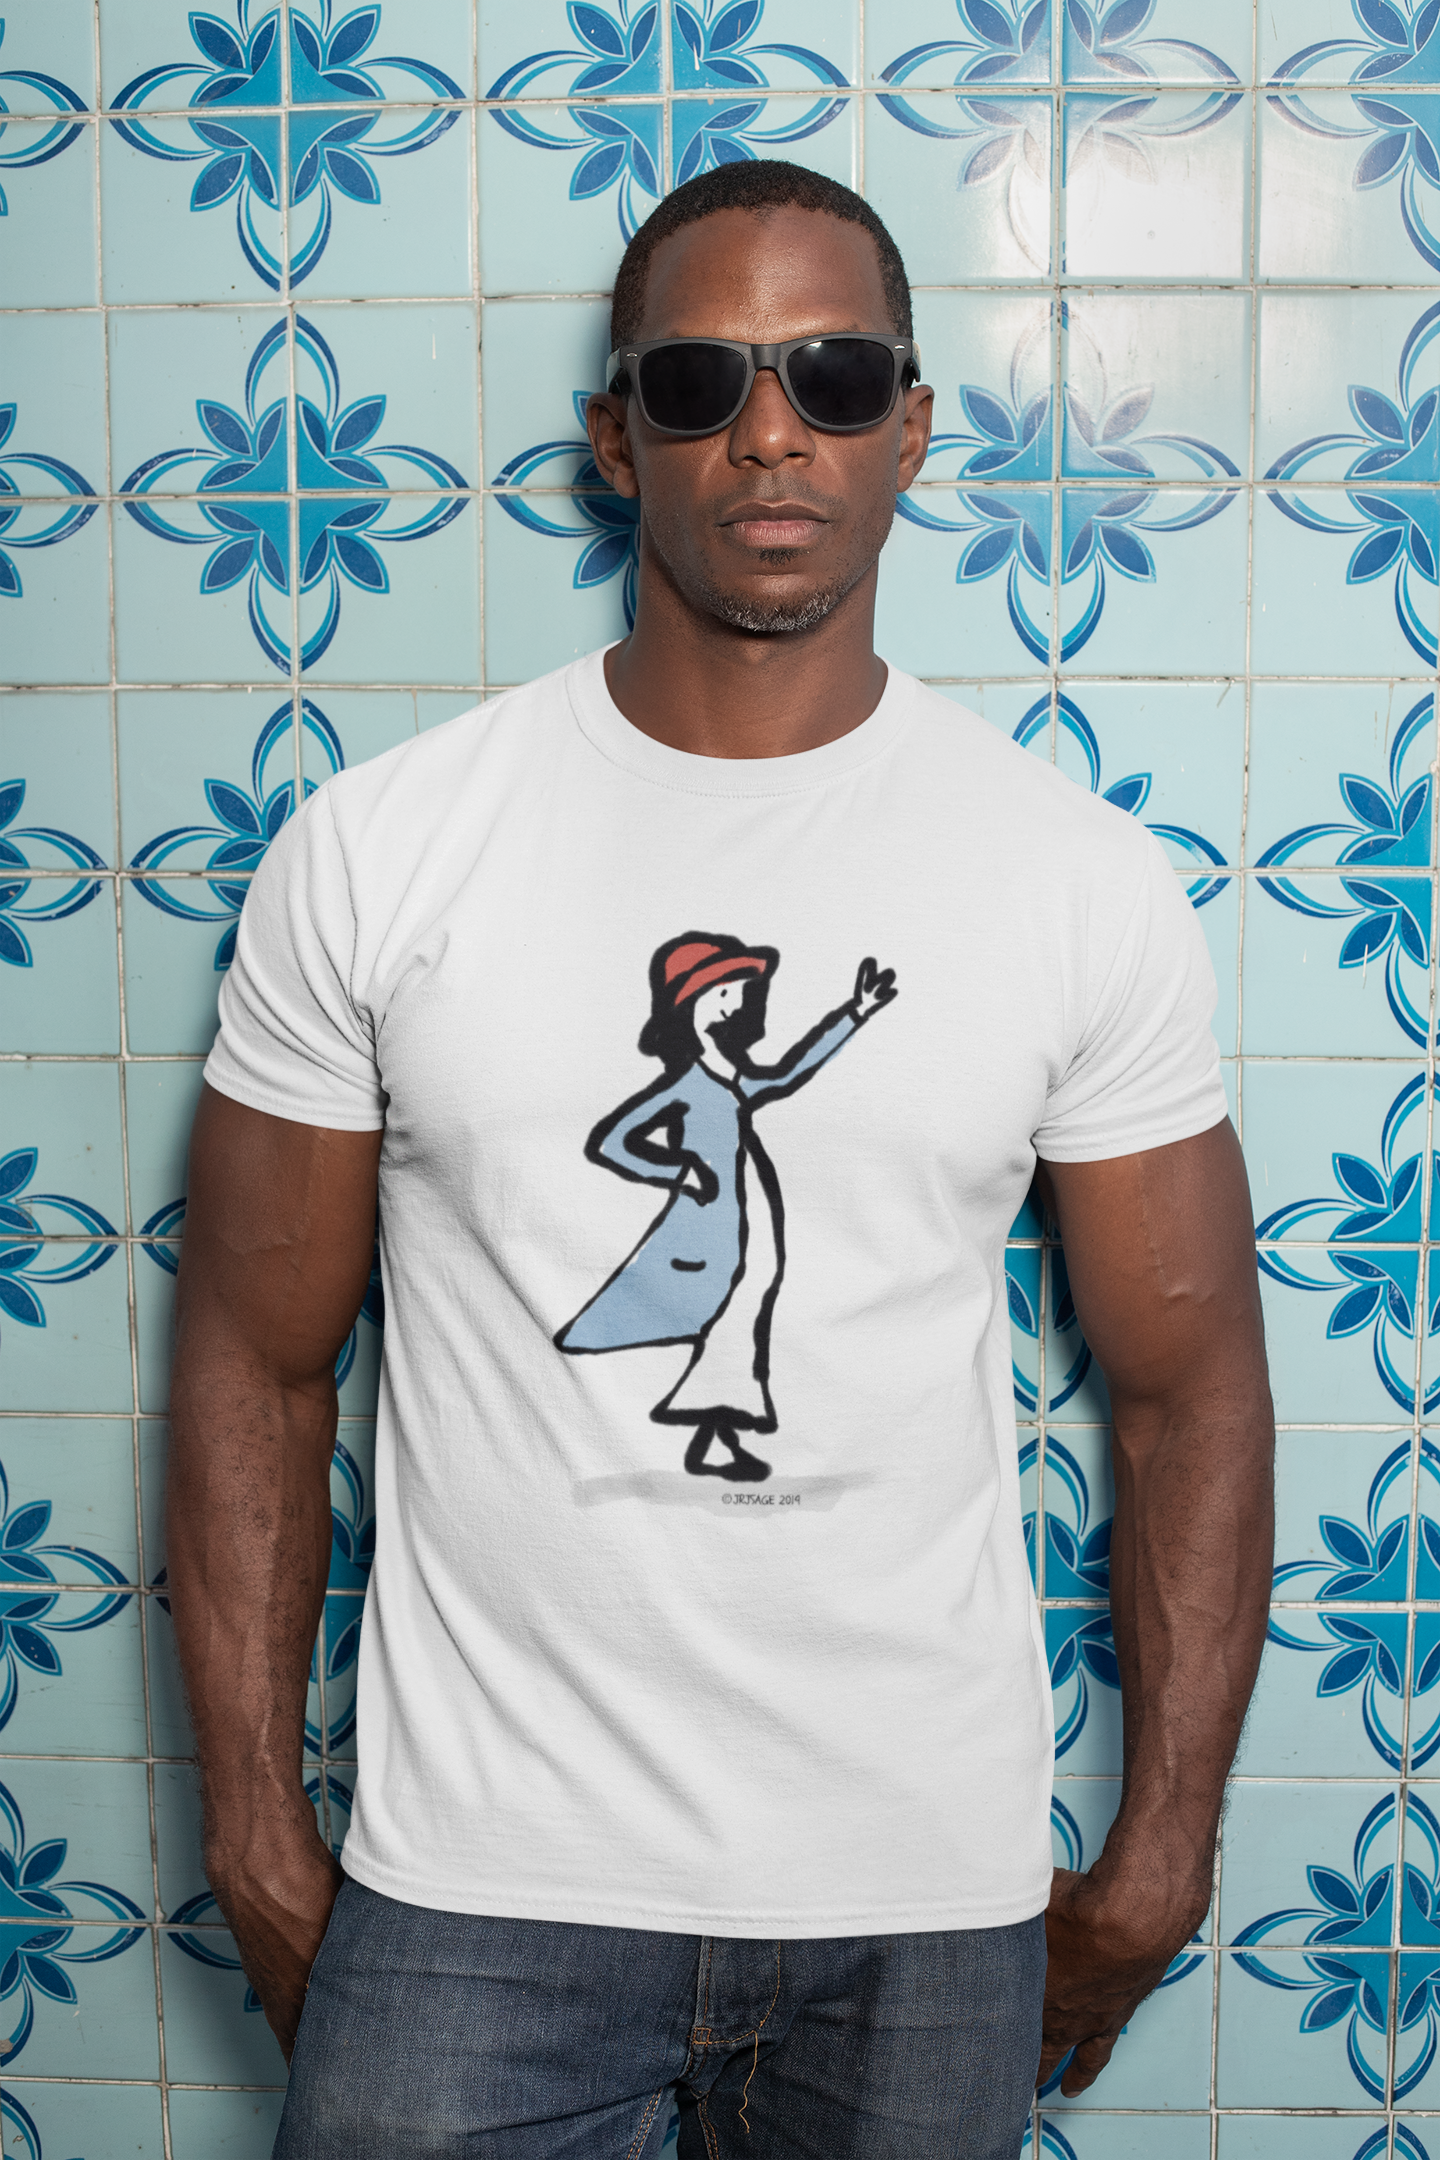 A young man in sunglasses wearing a vegan cotton t-shirt with printed illustration of a waving girl design by hector and bone